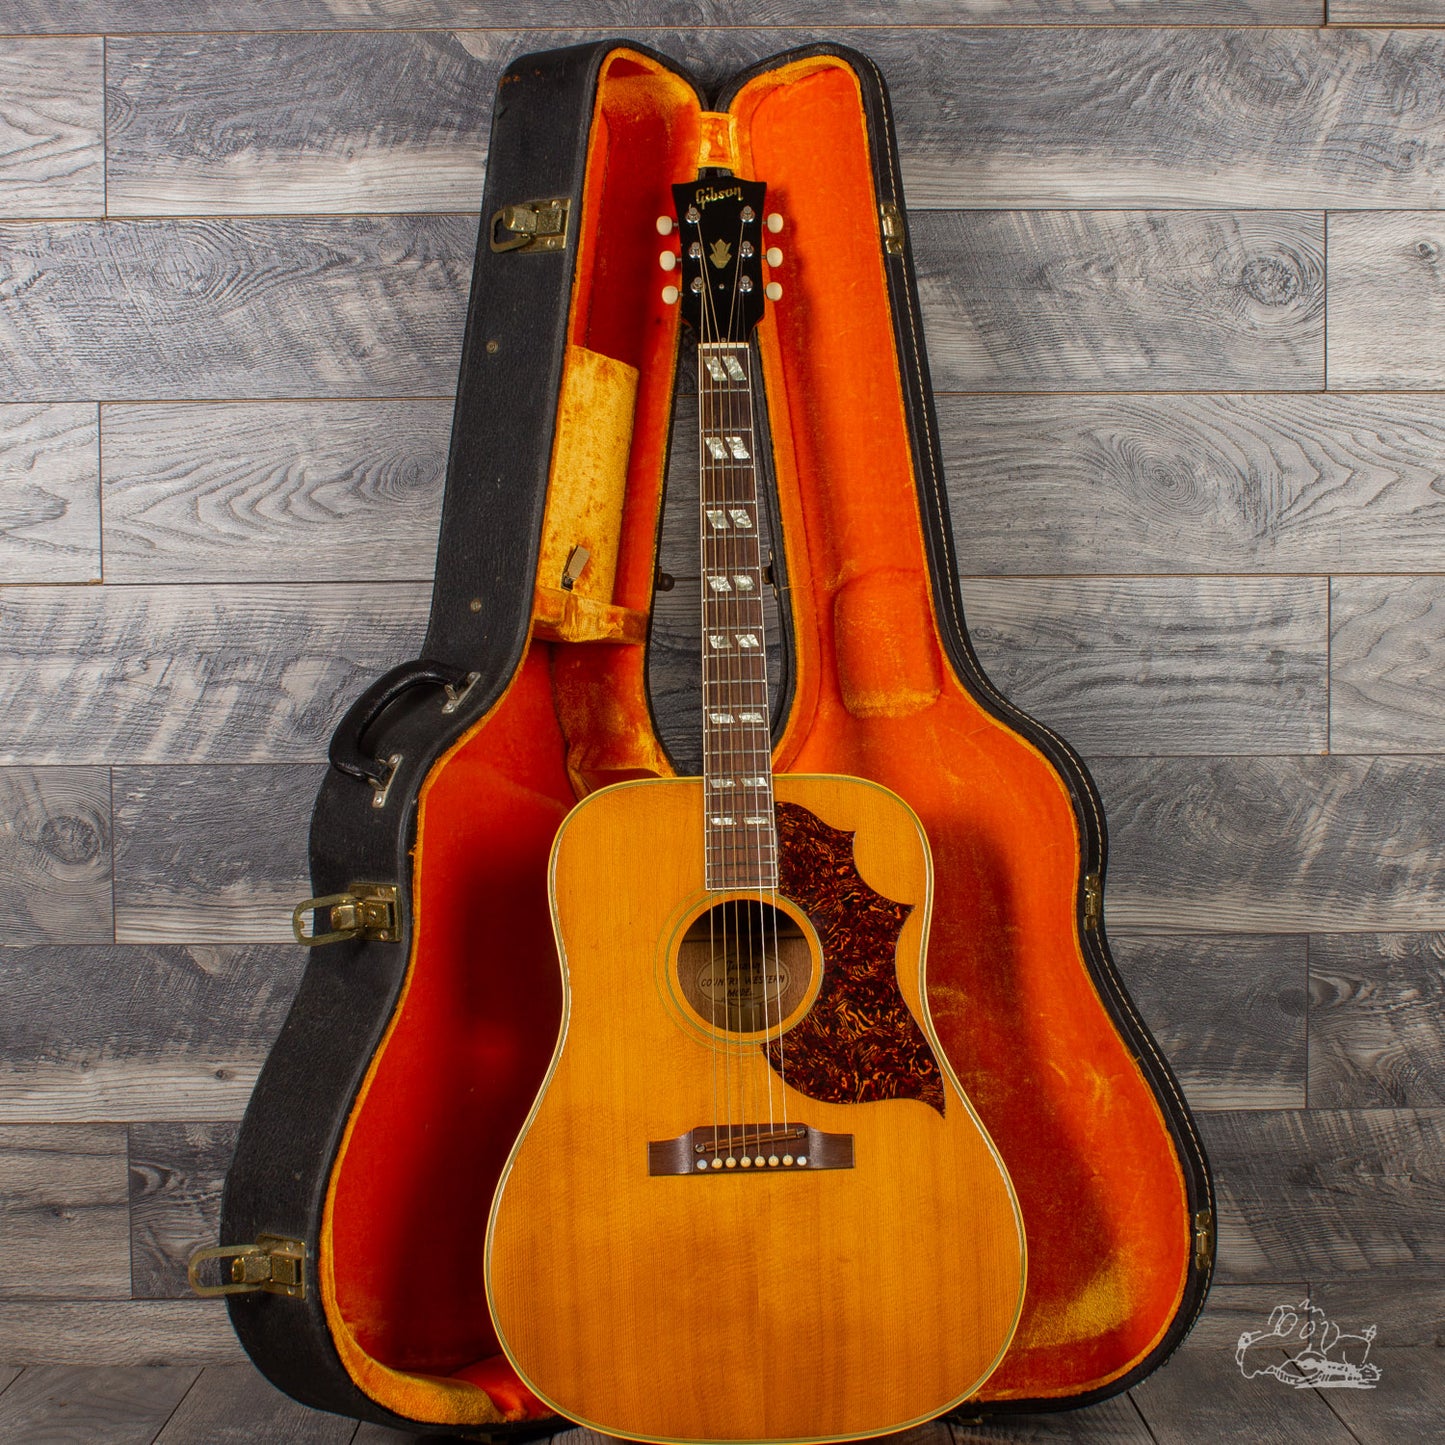 1968 Gibson Country Western